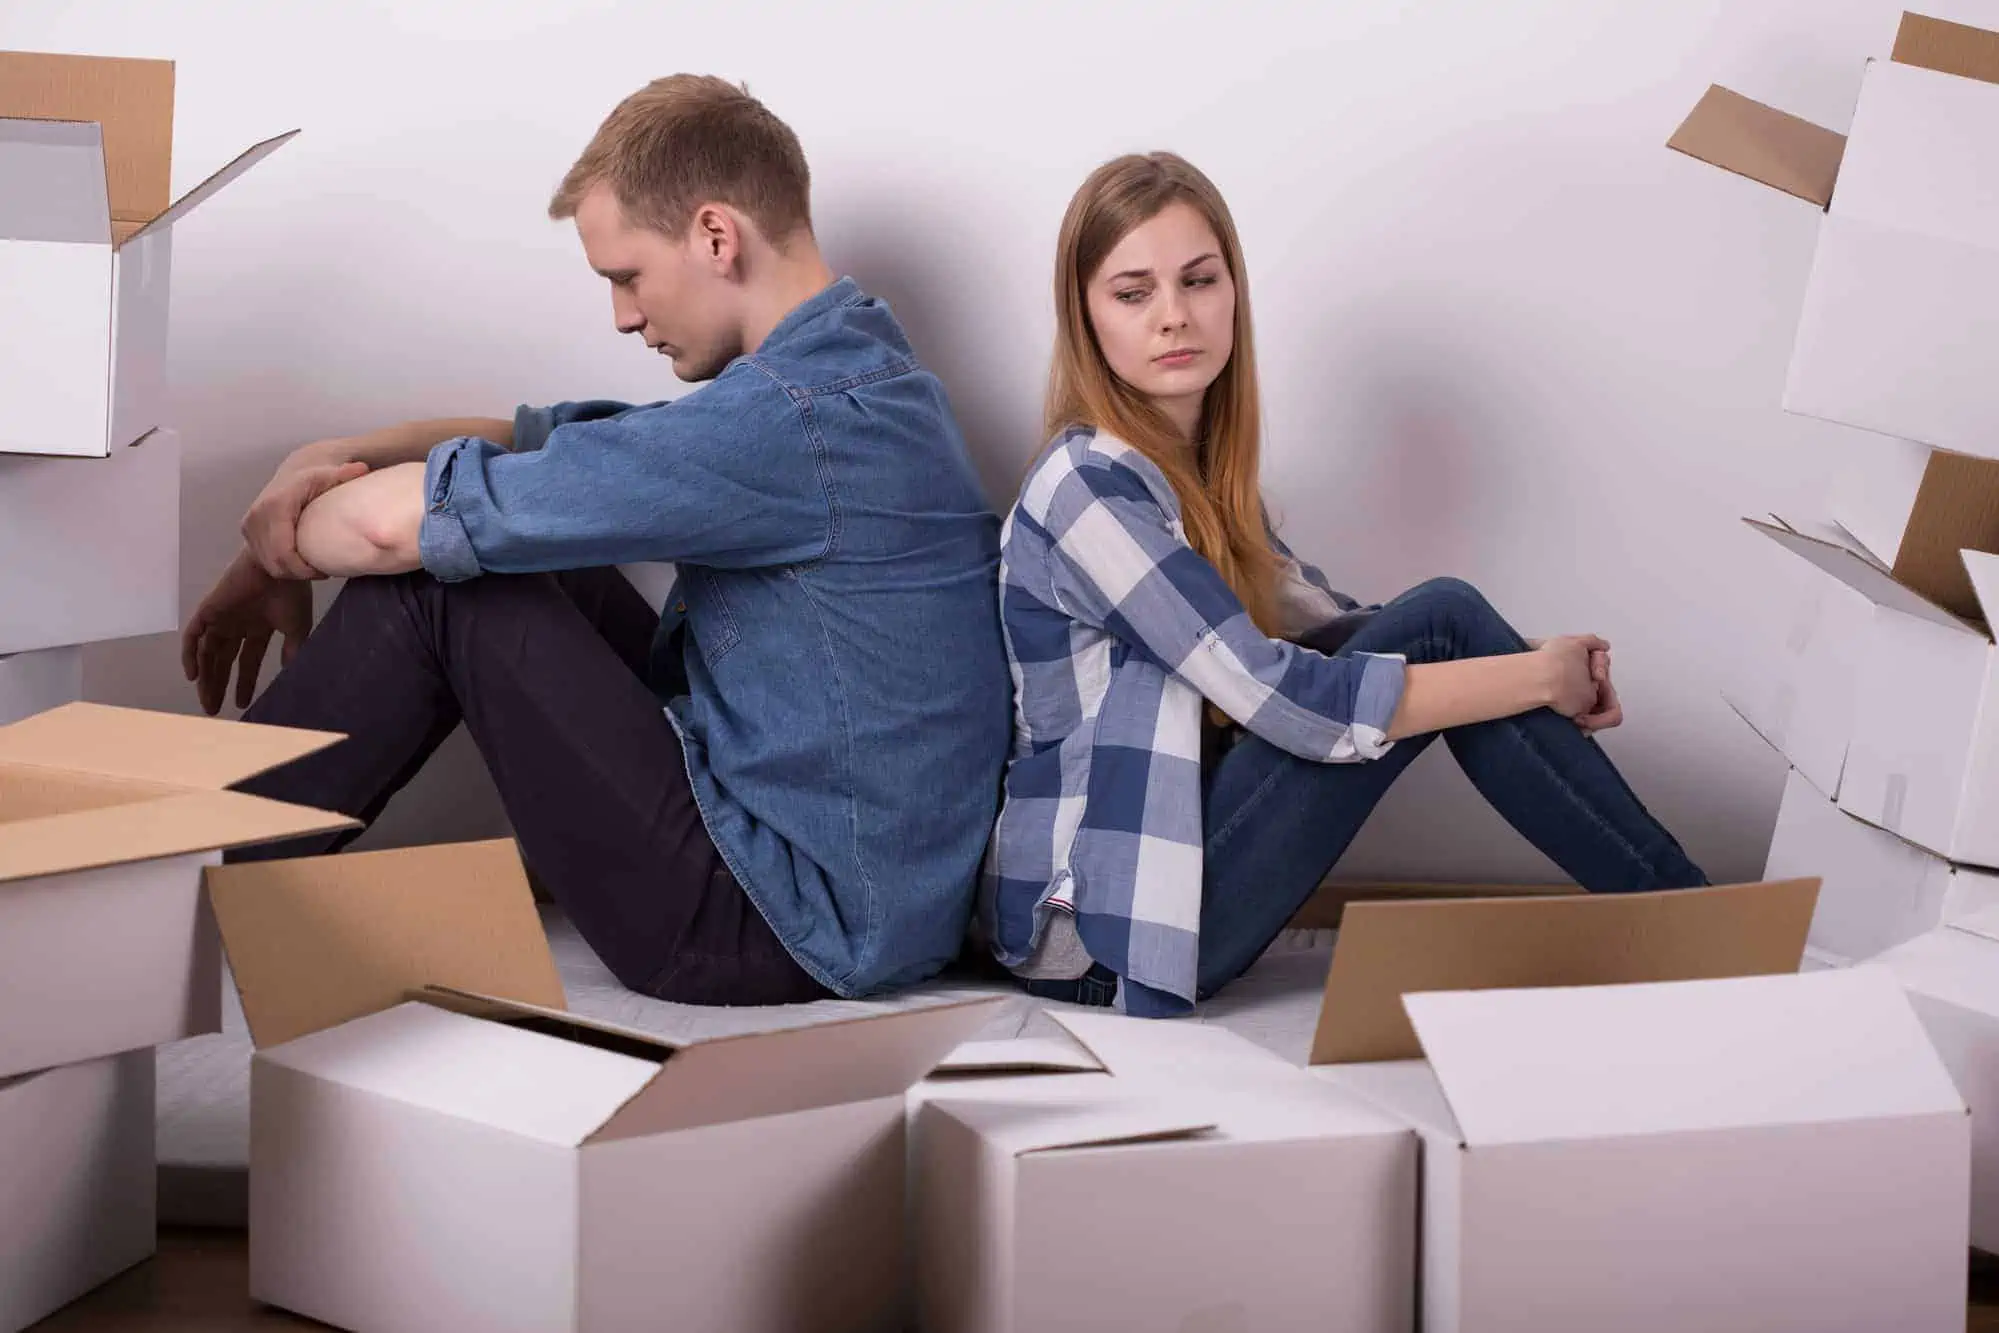 A man and a woman sitting on cardboard boxes